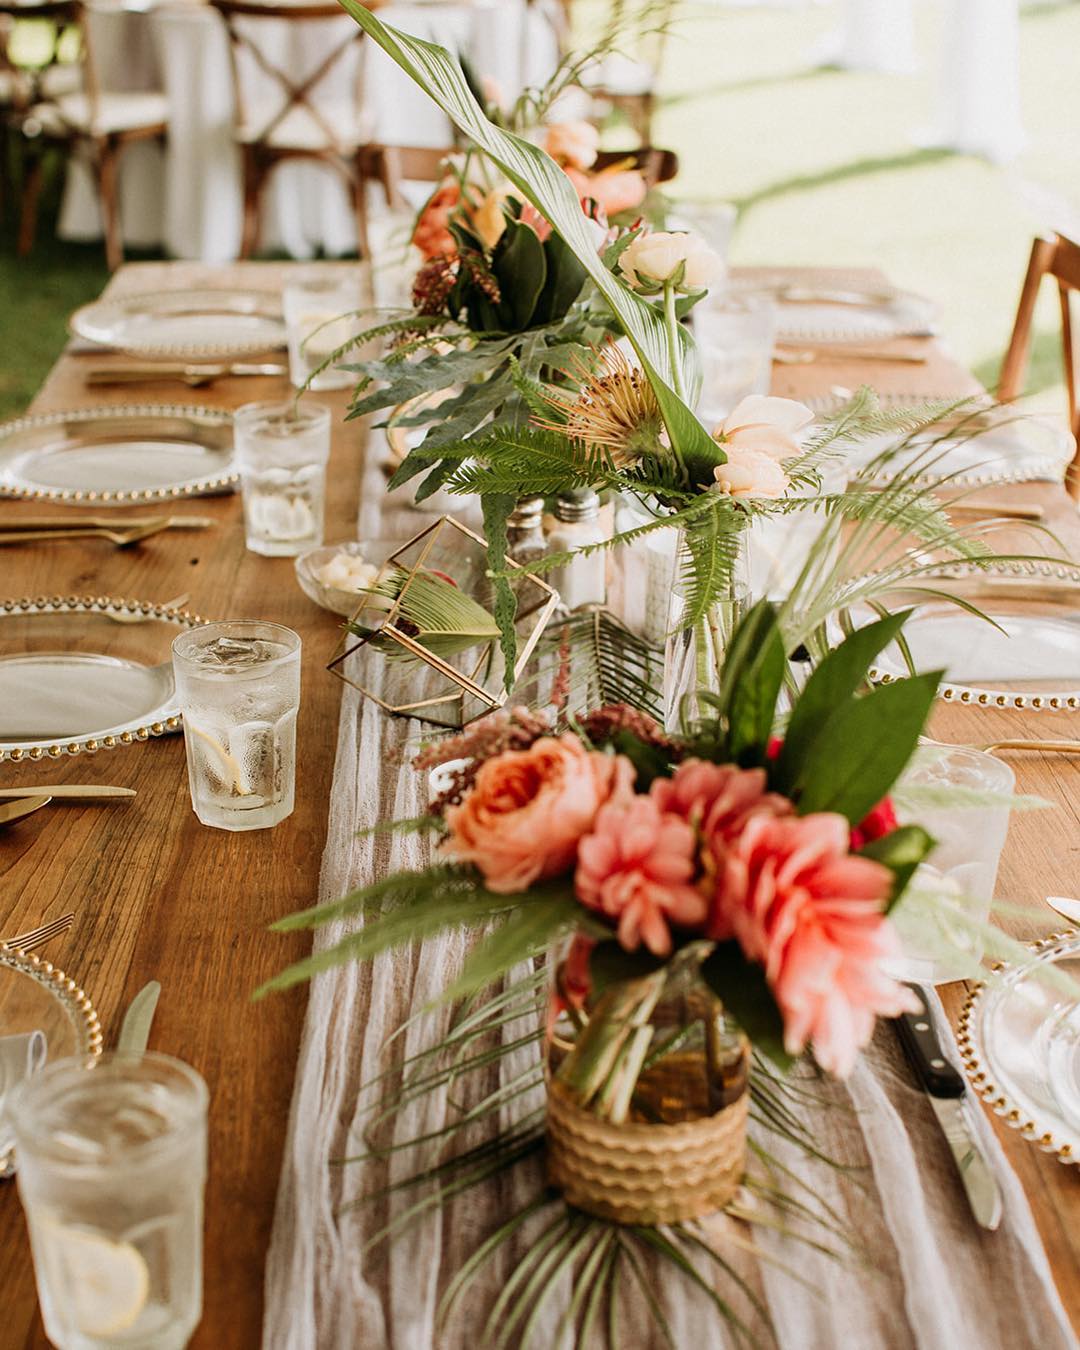 {coral is THE color this year & we love it!!}
photo | @ramblefreehannah 
styling/coordination | @eventsbysorrell .
.
#tablescape #tabledecor #centerpieces #tropical #coral #foliage #gold #boho #modern #weddingdesign #style #weddingflowers #lotusfloraldesigns #weddingflorist #love